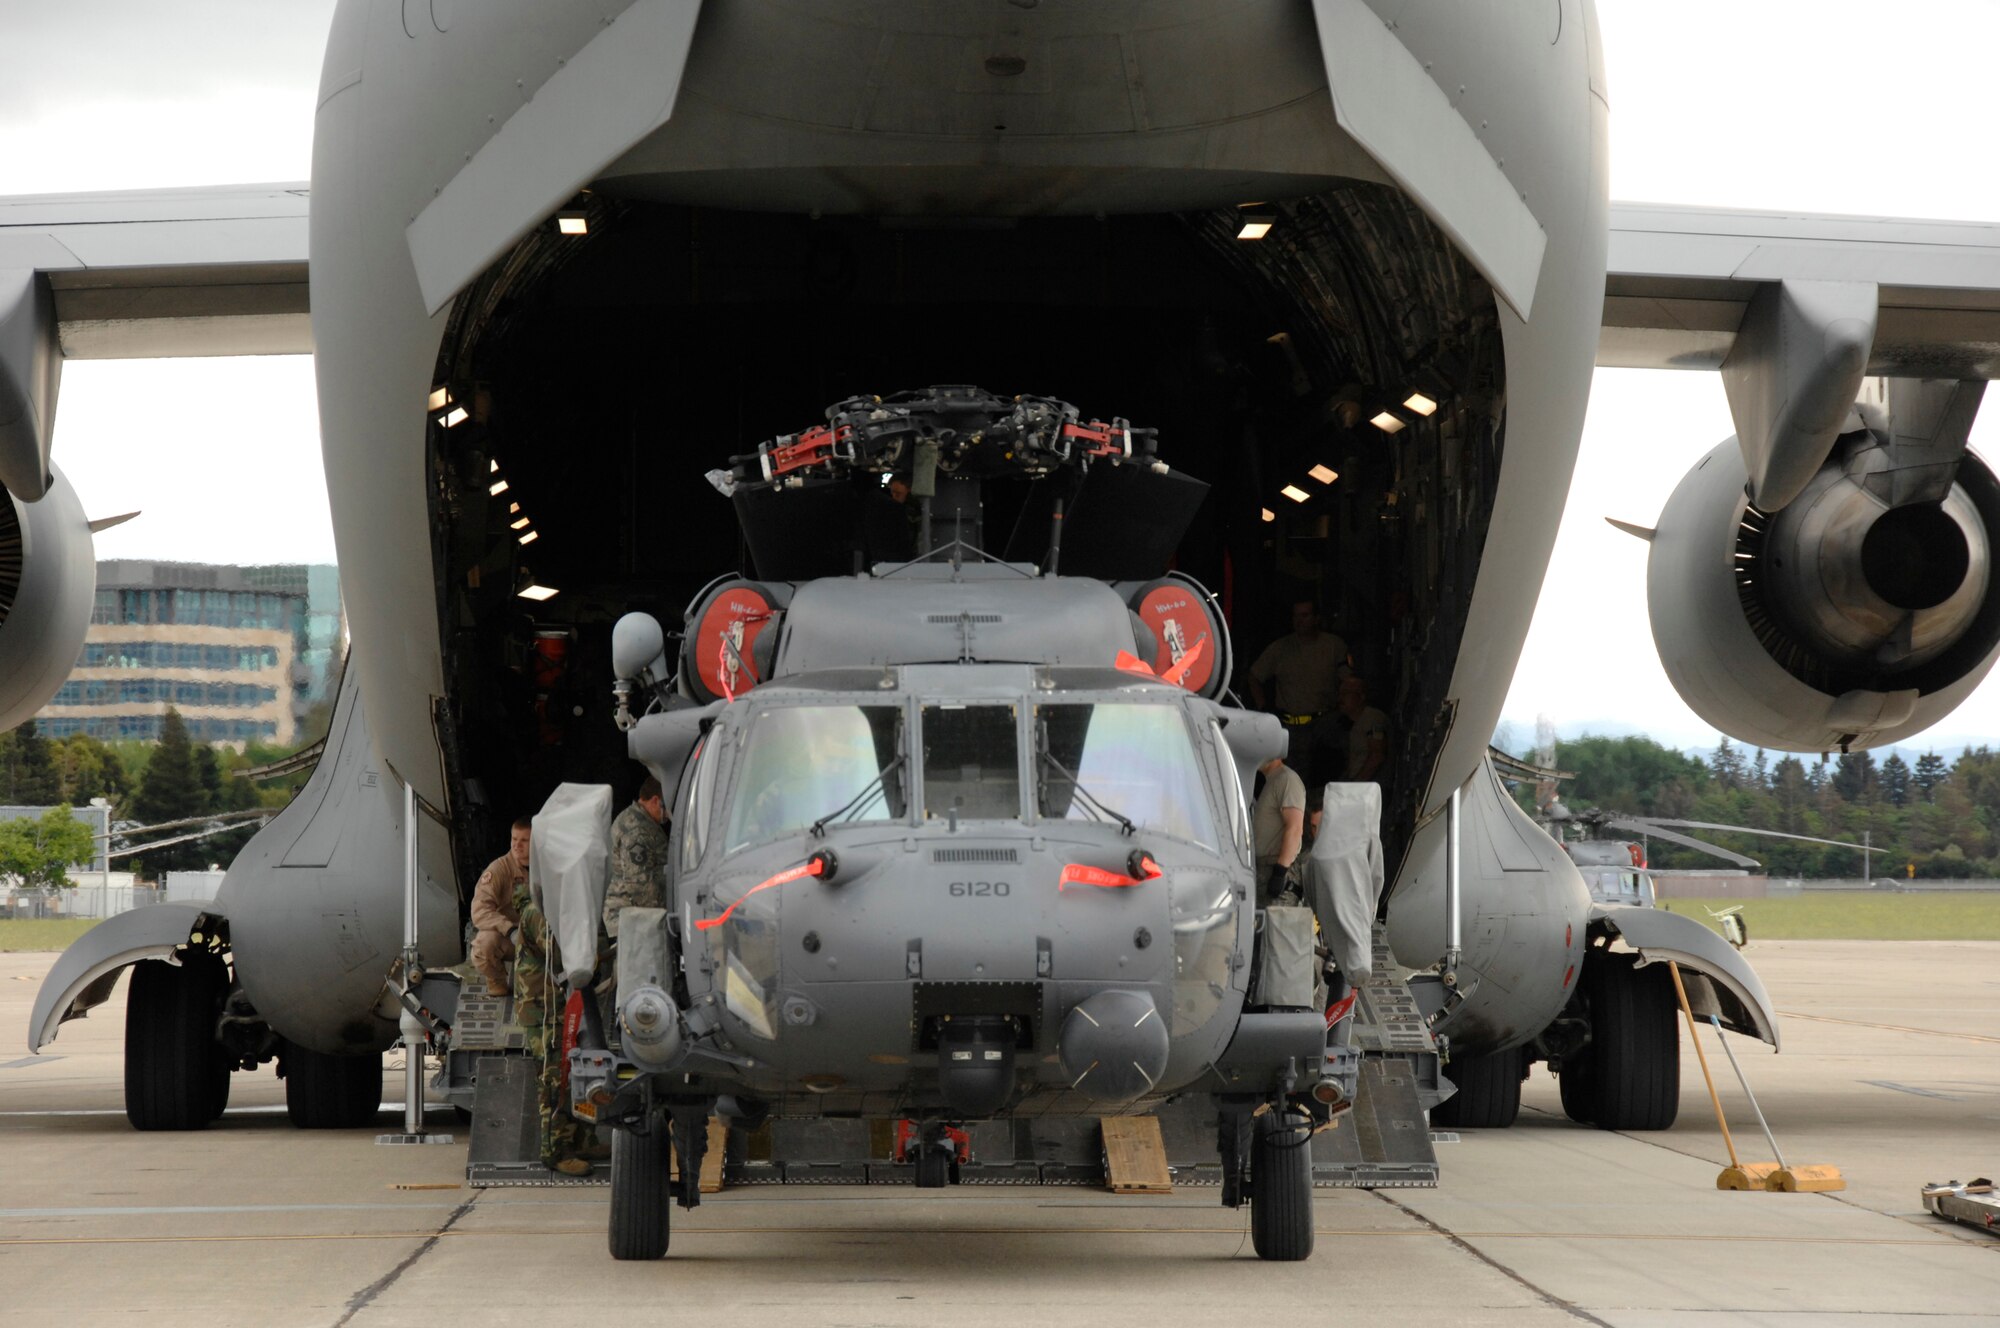 An HH-60G Pave Hawk rescue helicopter from the 129th Rescue Wing, Moffett Federal Airfield, Calif., is prepped for loading in a C-17 Globemaster.  More than 50 Airmen and three Pave Hawks from the 129th Rescue Wing deployed to Afghanistan May 3, 2009. (U.S. Air Force photo by Master Sgt. Dan Kacir)